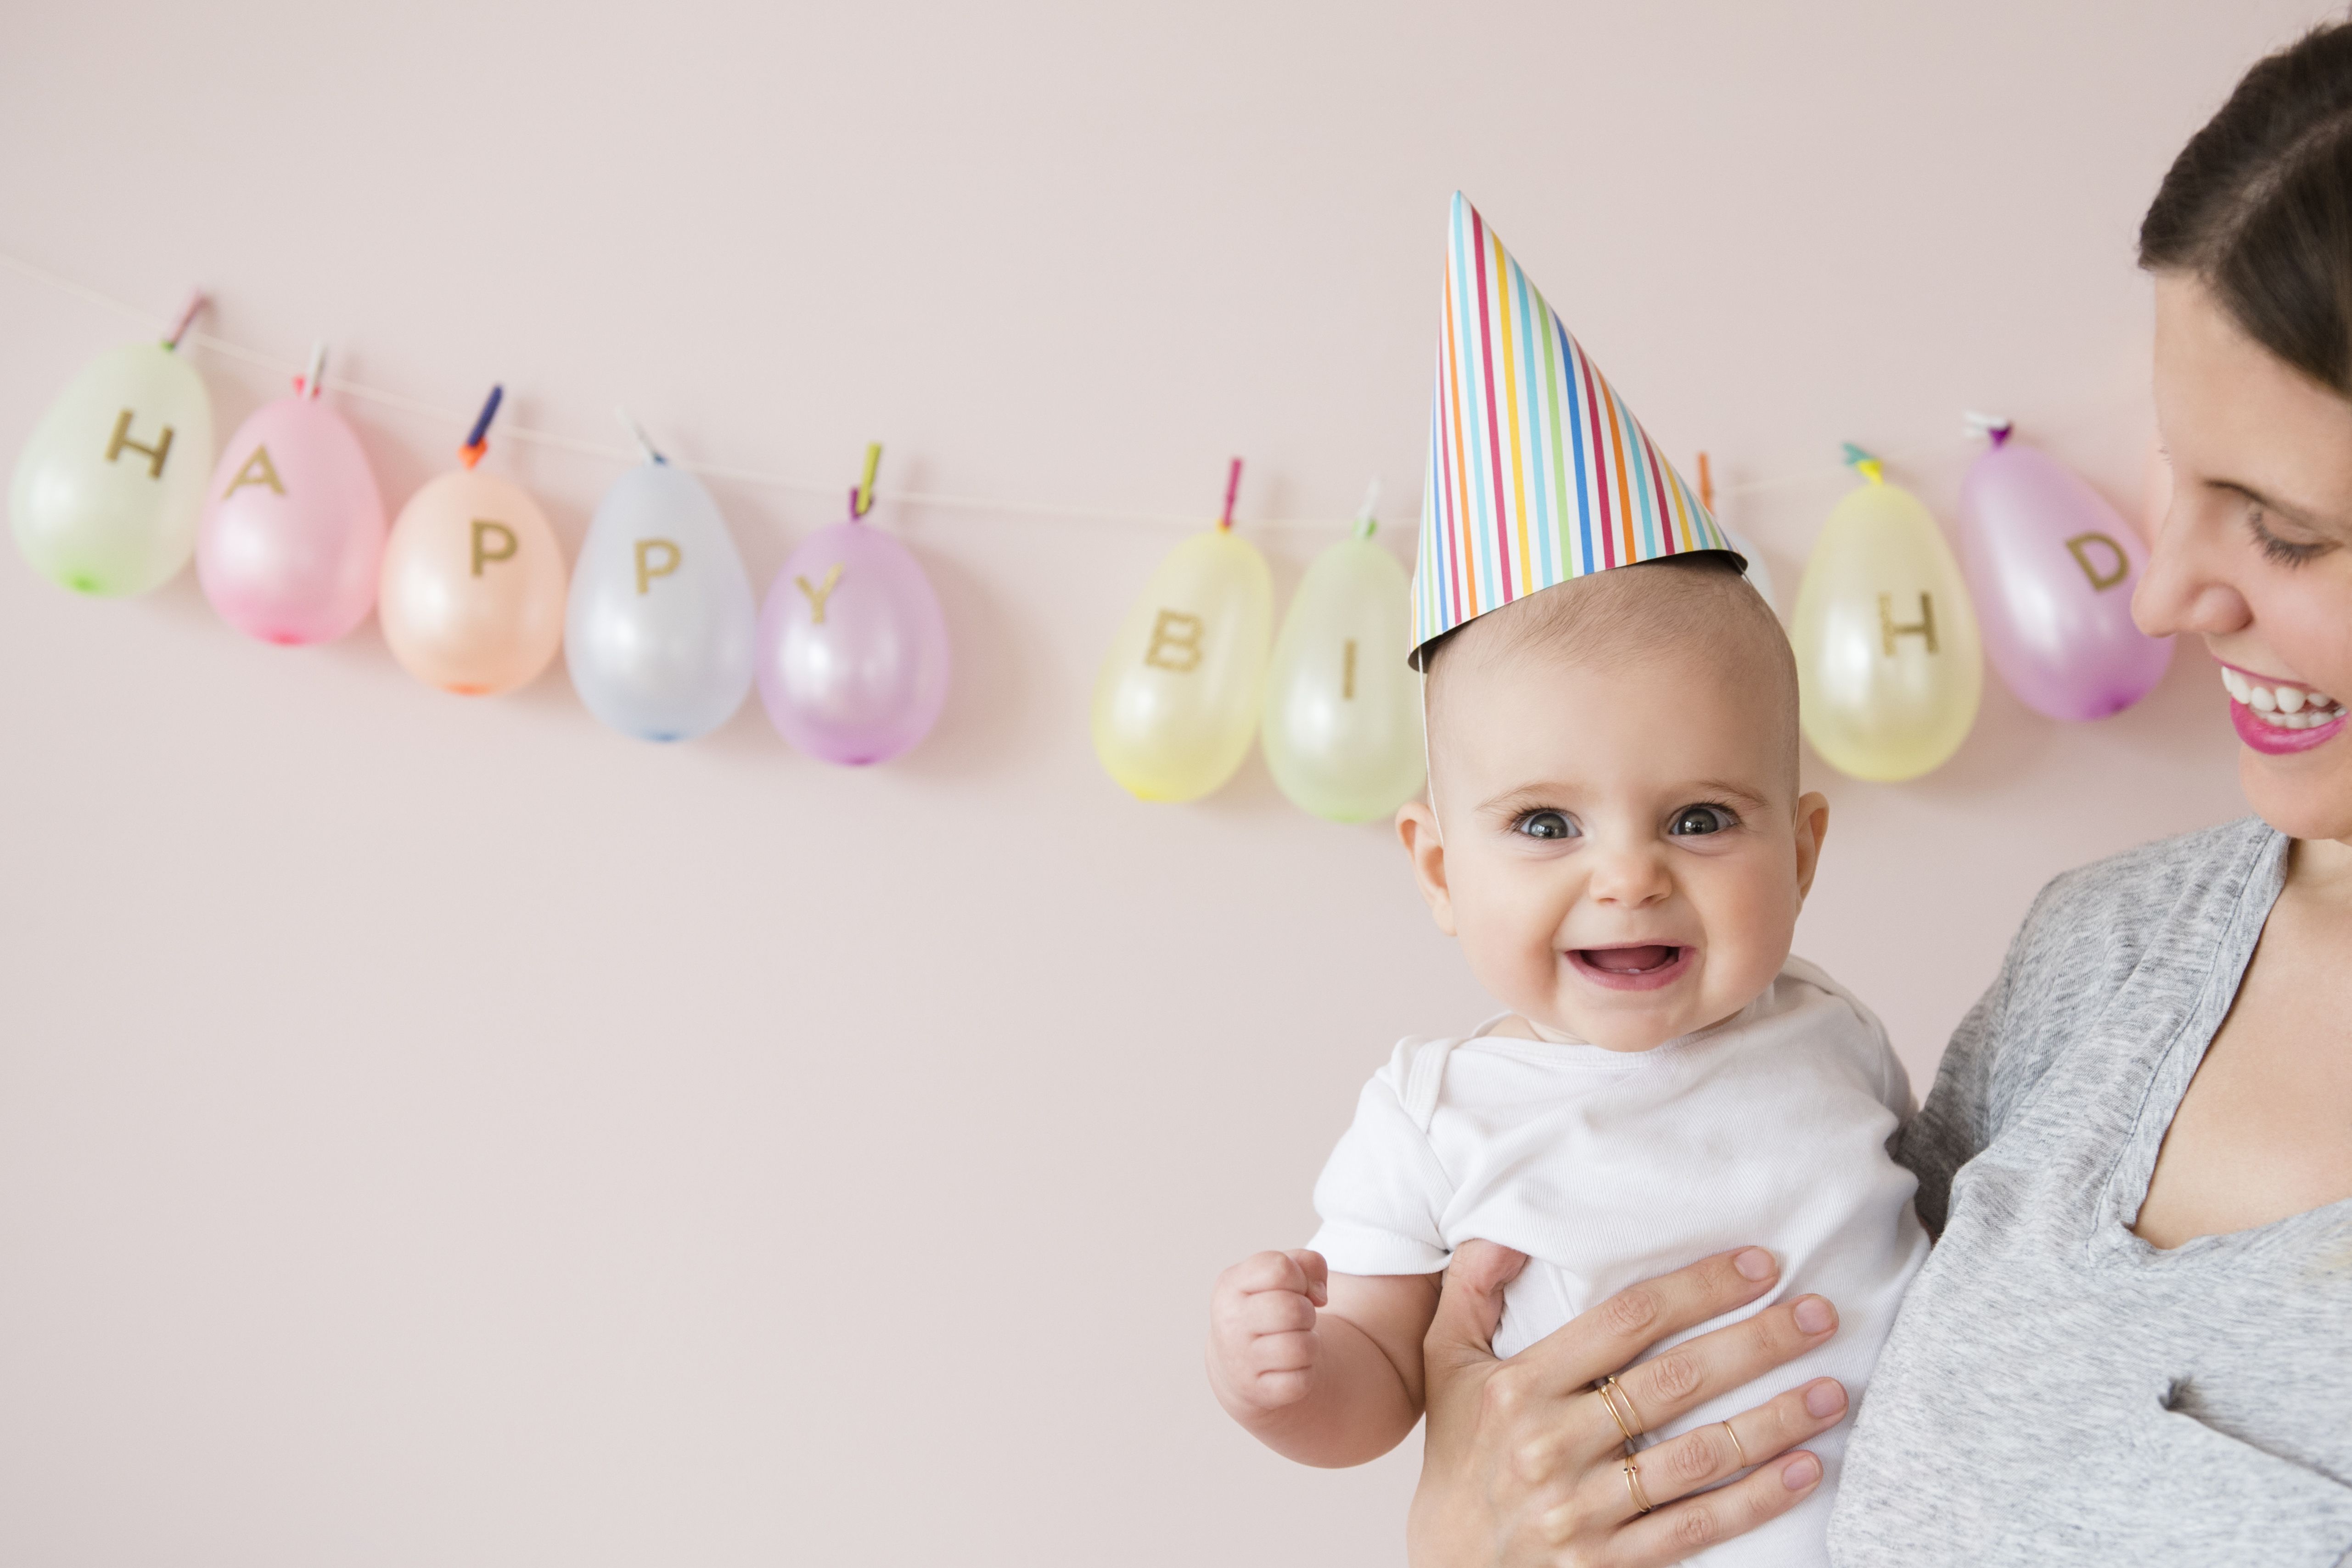 12 May Birthday Facts - Fascinating Facts About People Born In May